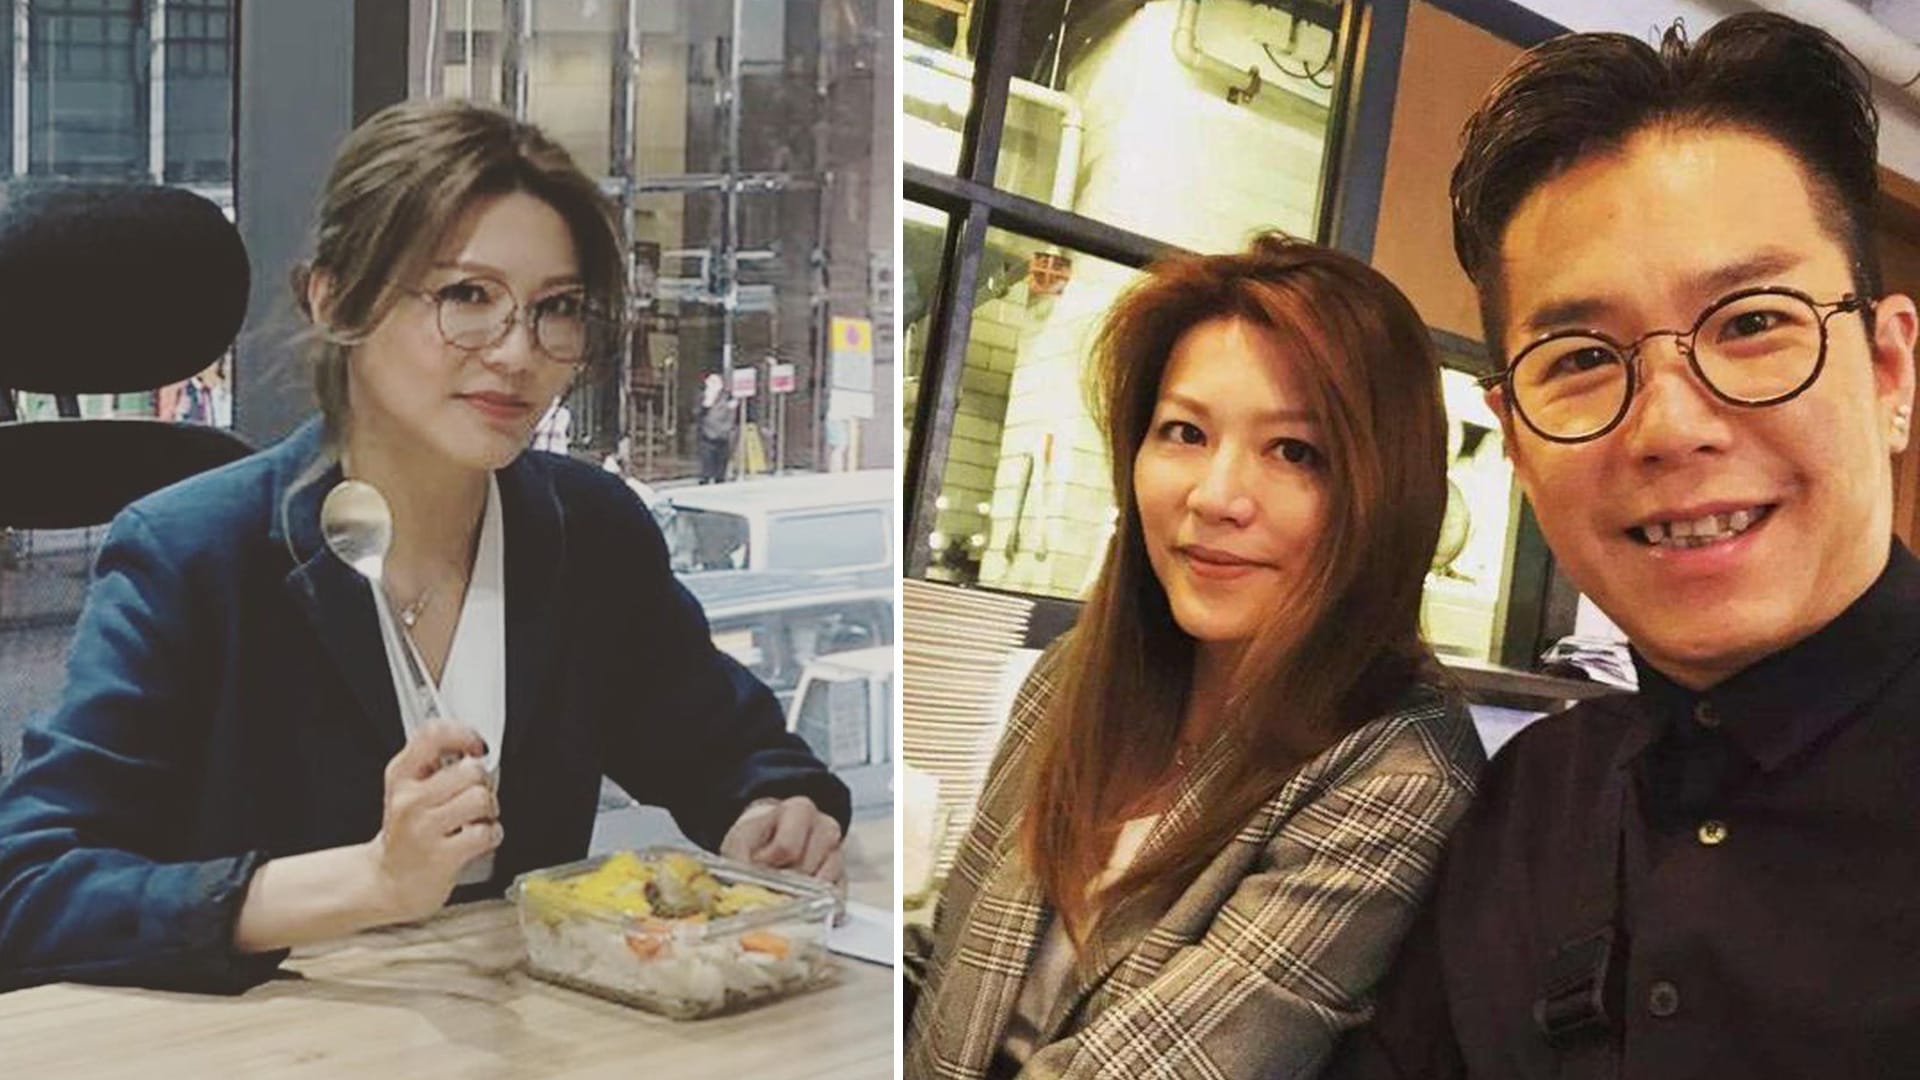 Jerry Lamb’s Ex-Wife, Actress Lily Hong, Turns To Selling Insurance Post-Divorce